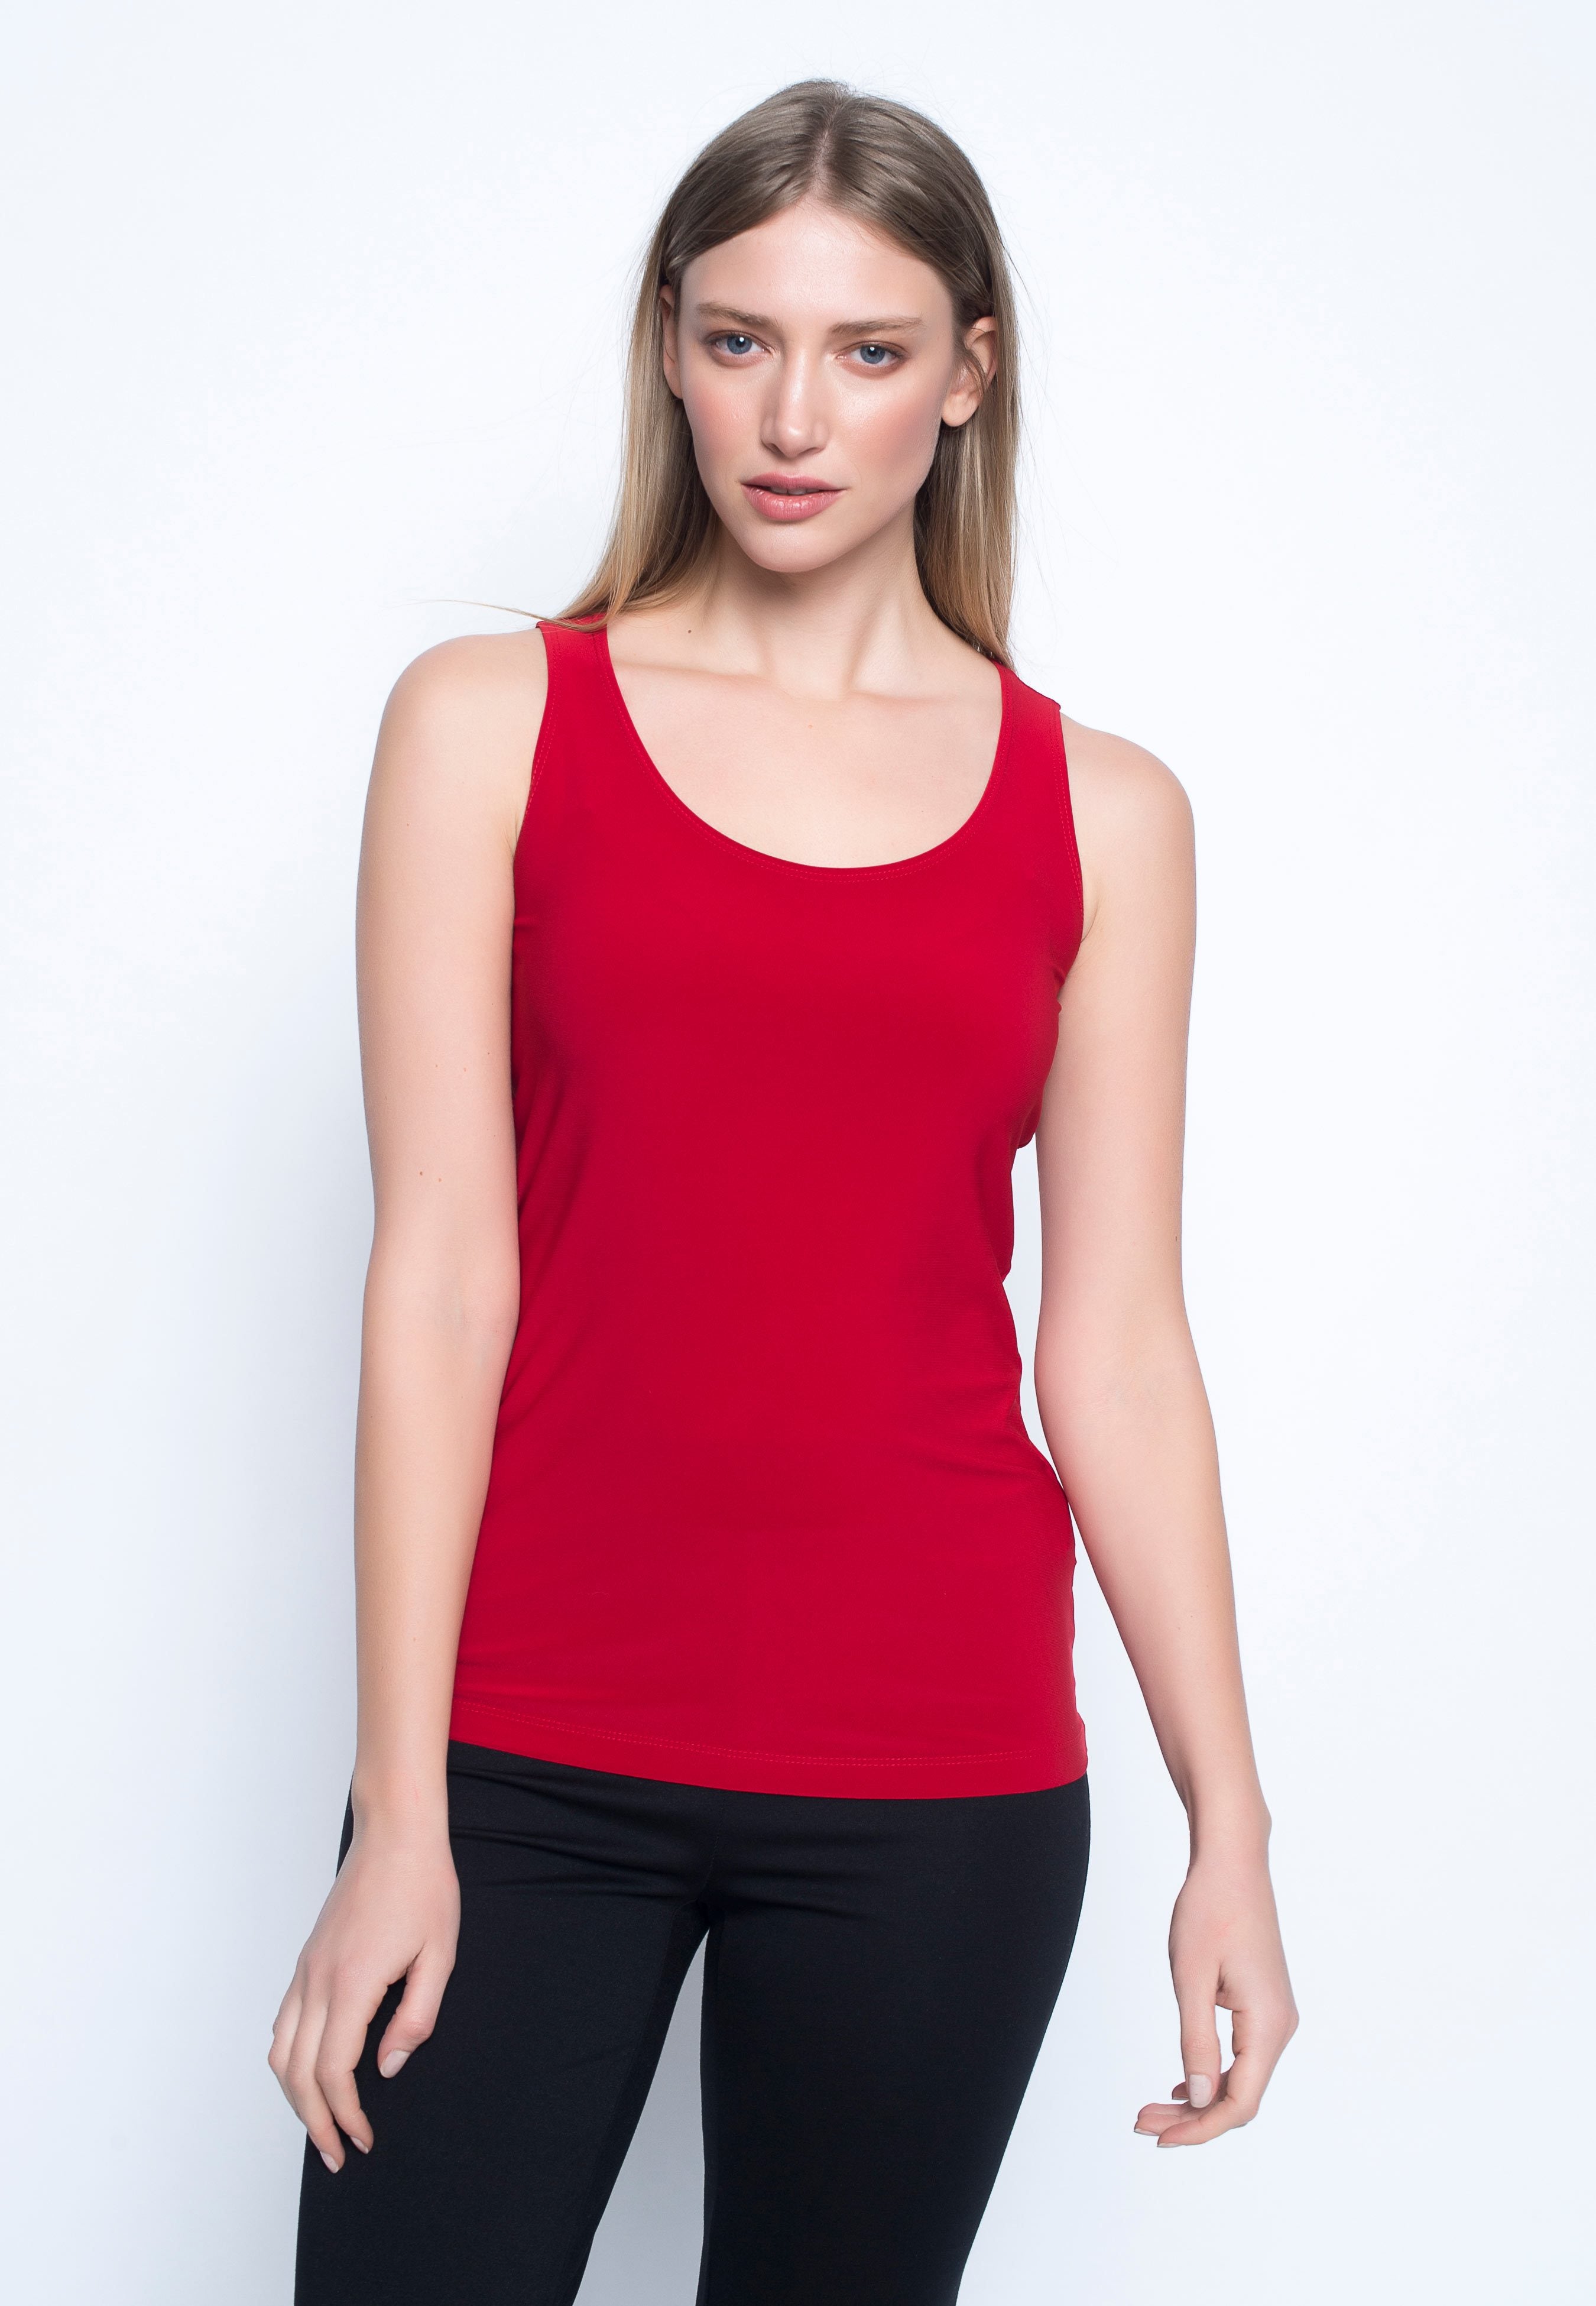 Scoop Neck Tank in red by Picadilly canada